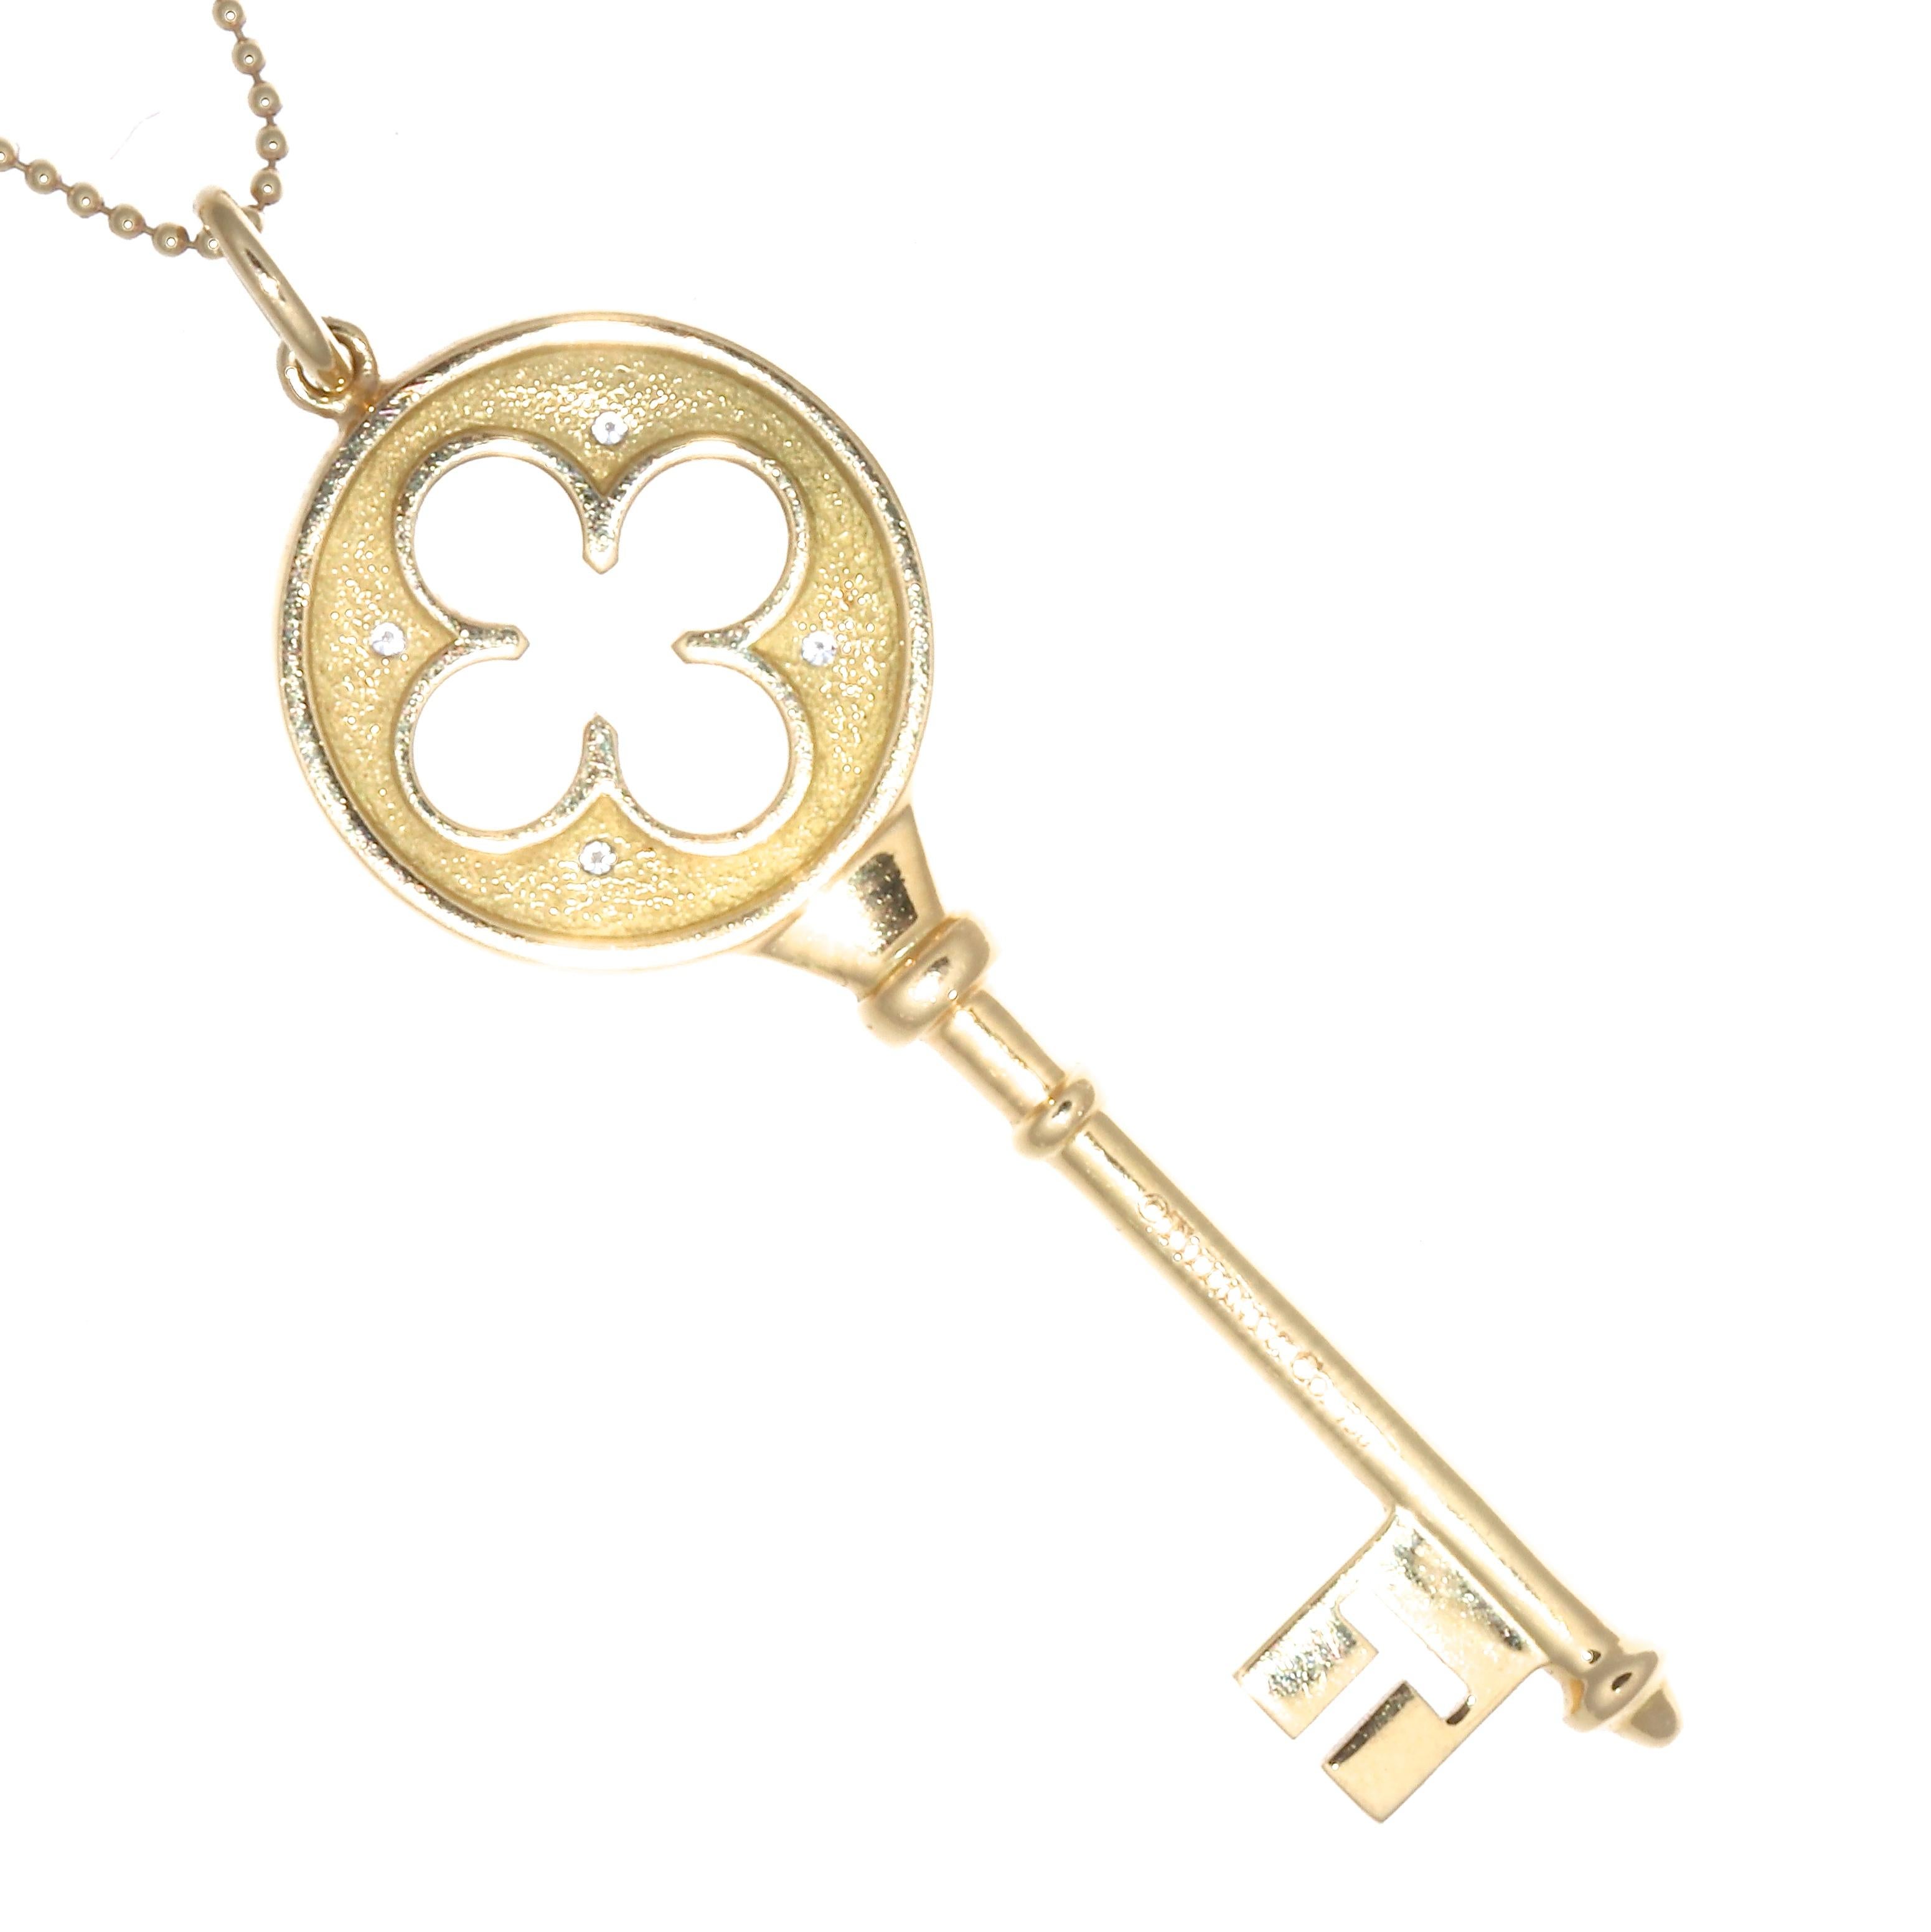 The key to the city, her heart, success and happiness. Tiffany & Co. diamond 18k gold key necklace. Featuring 4 round brilliant cut diamonds graded D,E color, VVS clarity. Circa 1980's. Both Signed Tiffany. pendant is 2 inches x 3/4 inches. Necklace